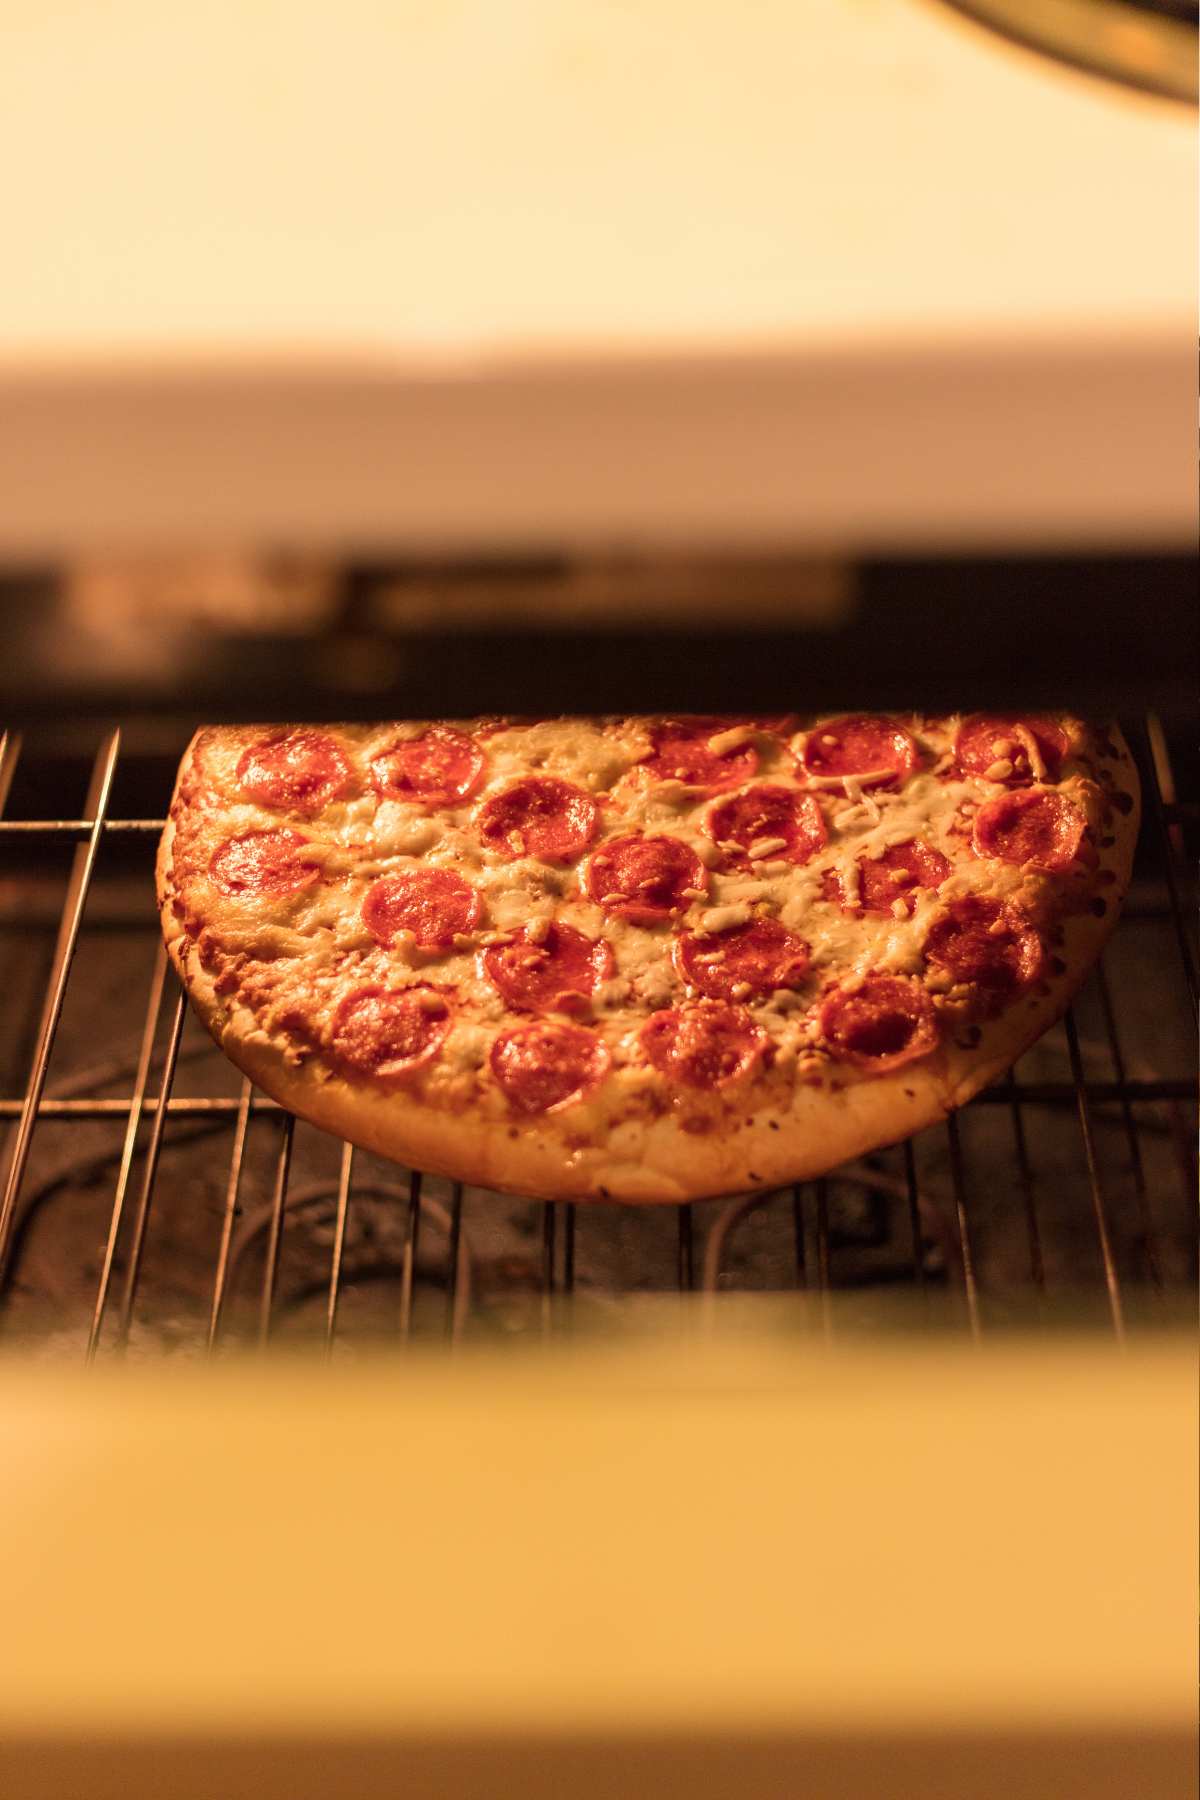 To make the best homemade pizza at home, it’s important to bake it at the correct temperature for the best results. If the oven is too hot, you could burn the pizza. If it’s too cold, it can get soggy. With the technique and Pizza Oven Temperature, you’ll be making pies that rival the ones at your favorite pizzeria! Plus, we’ll also share with you the best oven temperature to preheat pizza!